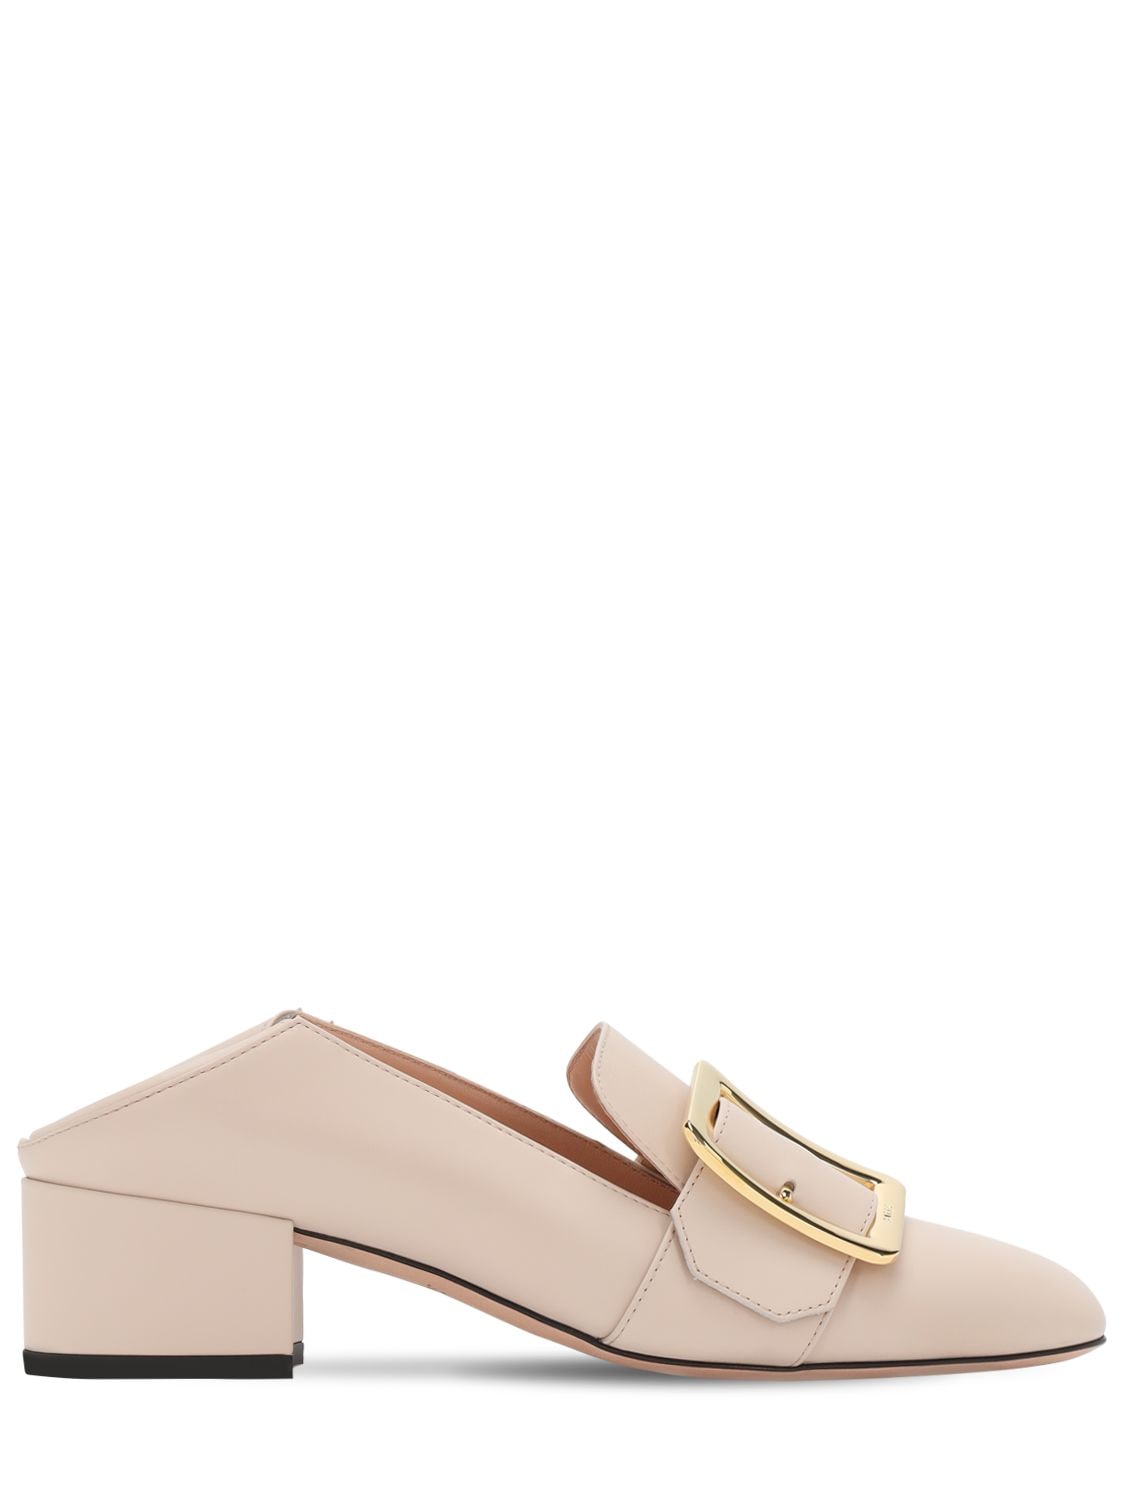 Bally 40mm Janelle Leather Pumps In Blush